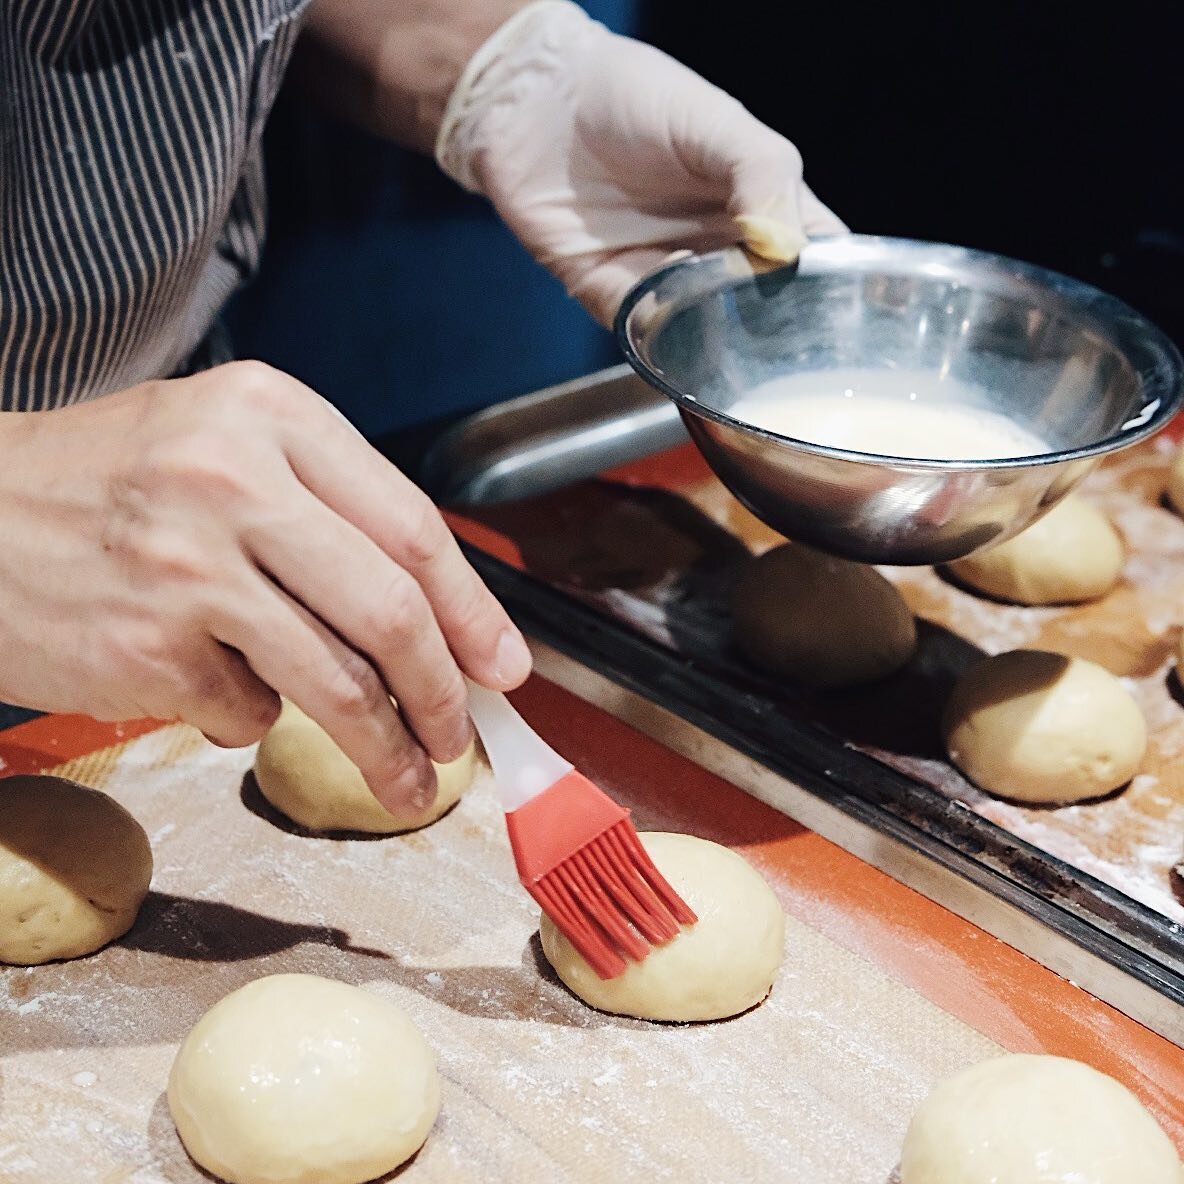 Happiness is the smell of freshly-baked brioche
#TUNGdining #finedining #asias100best #summermenu #PaletteOfFreshness #cheflife #finedininglovers #culinary #gastroartistry